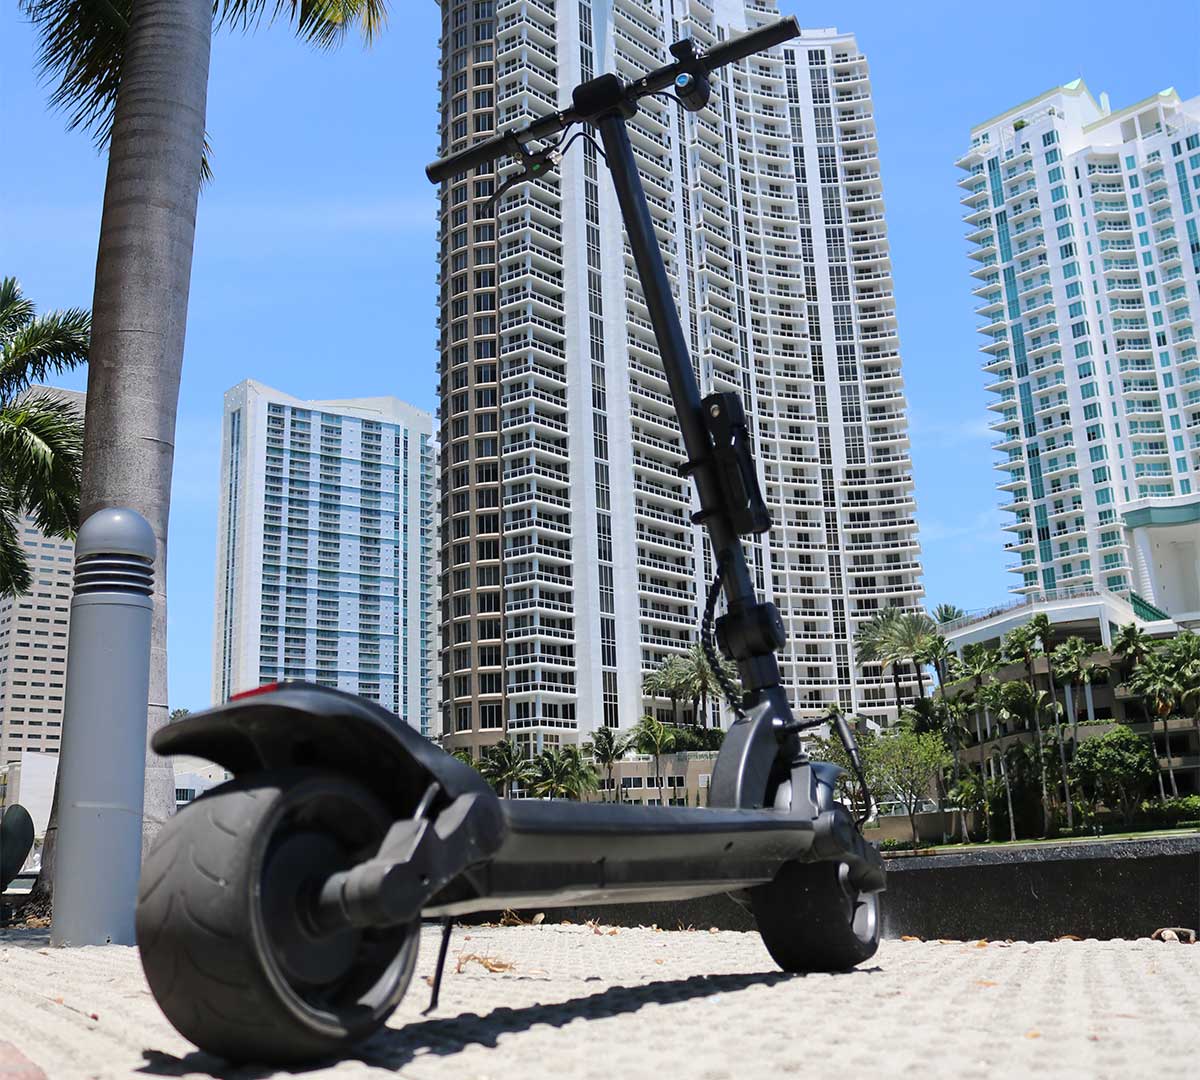 Showcase your DIY electric scooter against the city skyline, a testament to functional urban customization.